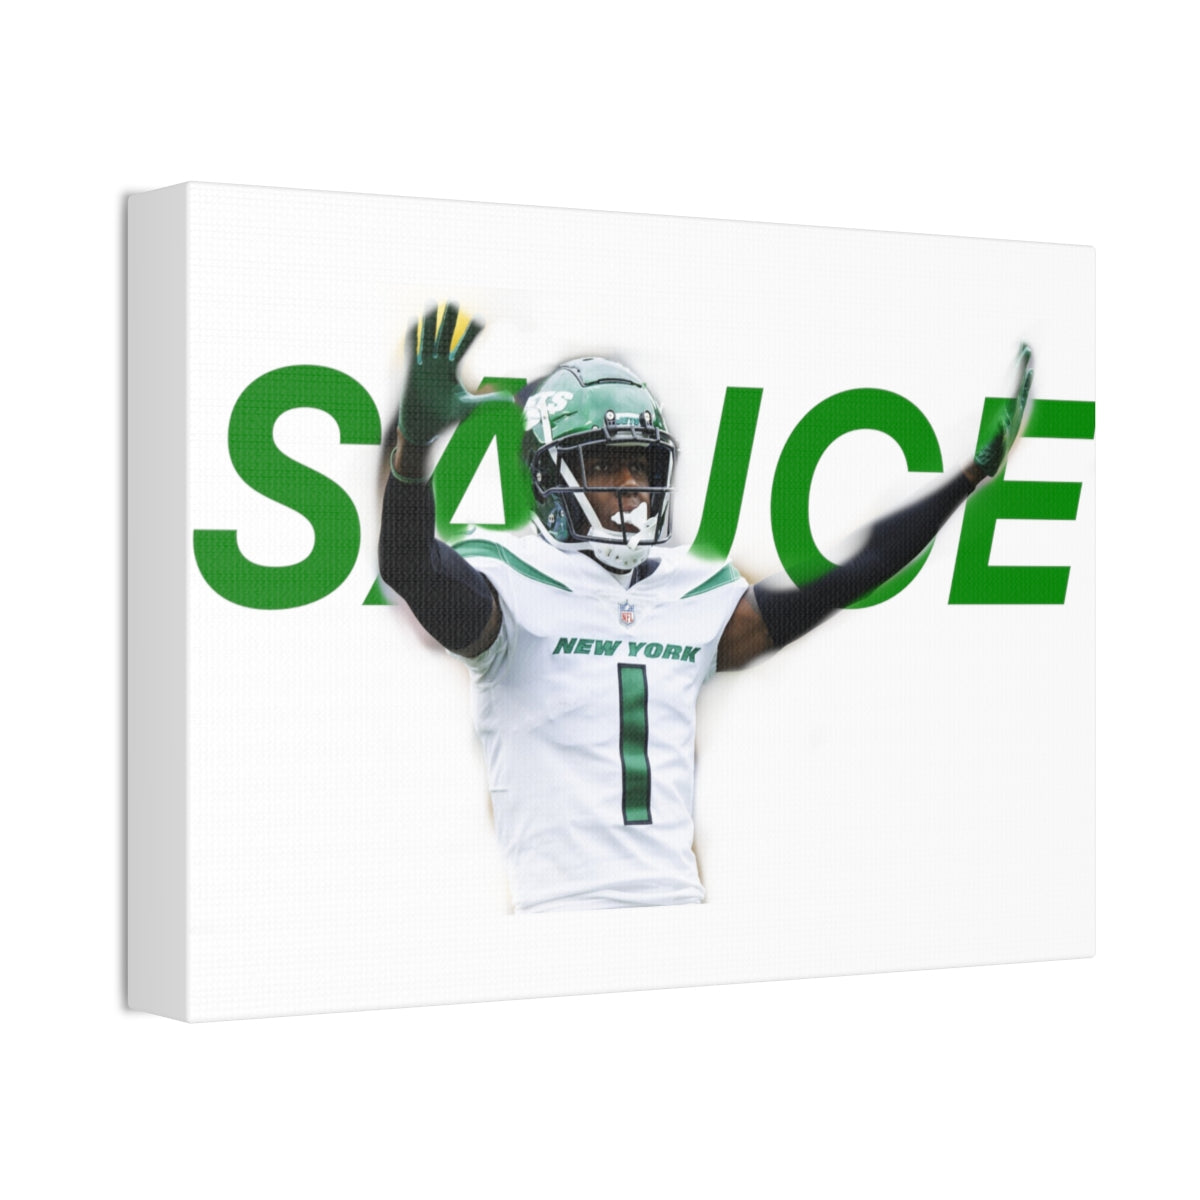 Sauce Picture on Canvas - IsGoodBrand